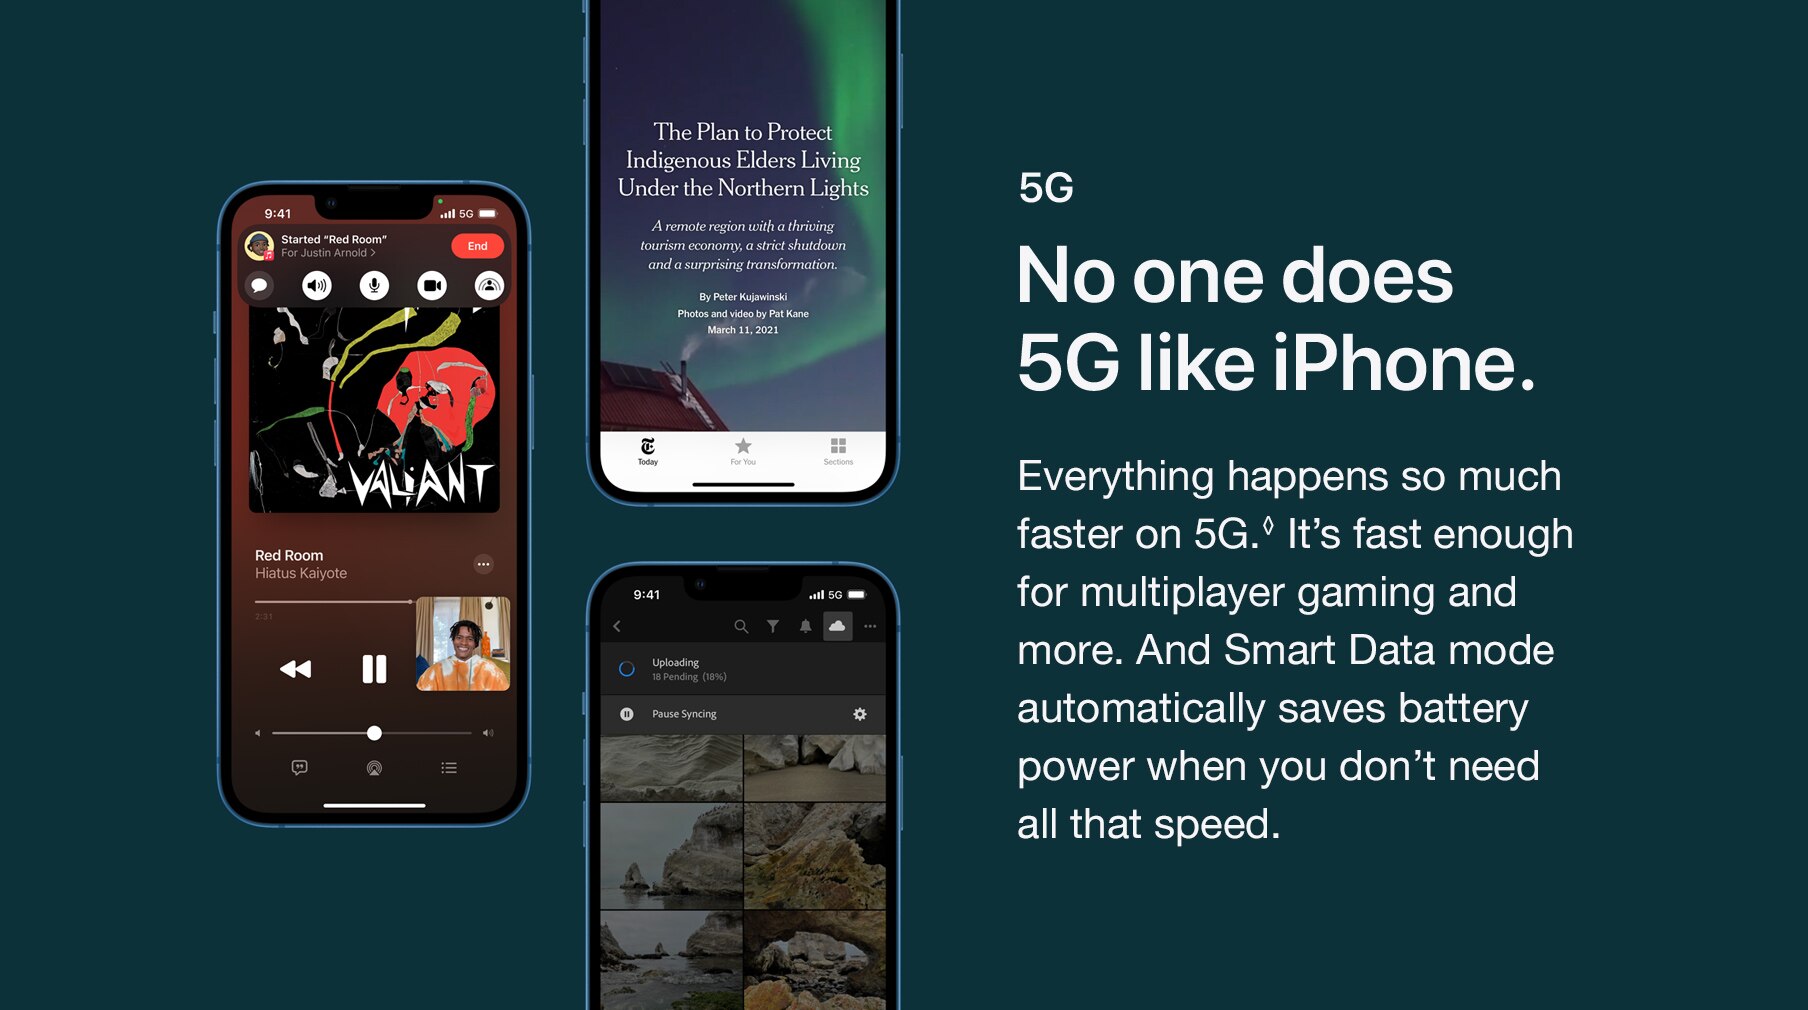 5G. No one does 5G like iPhone. Everything happens so much faster on 5G.◊ It’s fast enough for multiplayer gaming and more. And Smart Data mode automatically saves battery power when you don’t need all that speed.